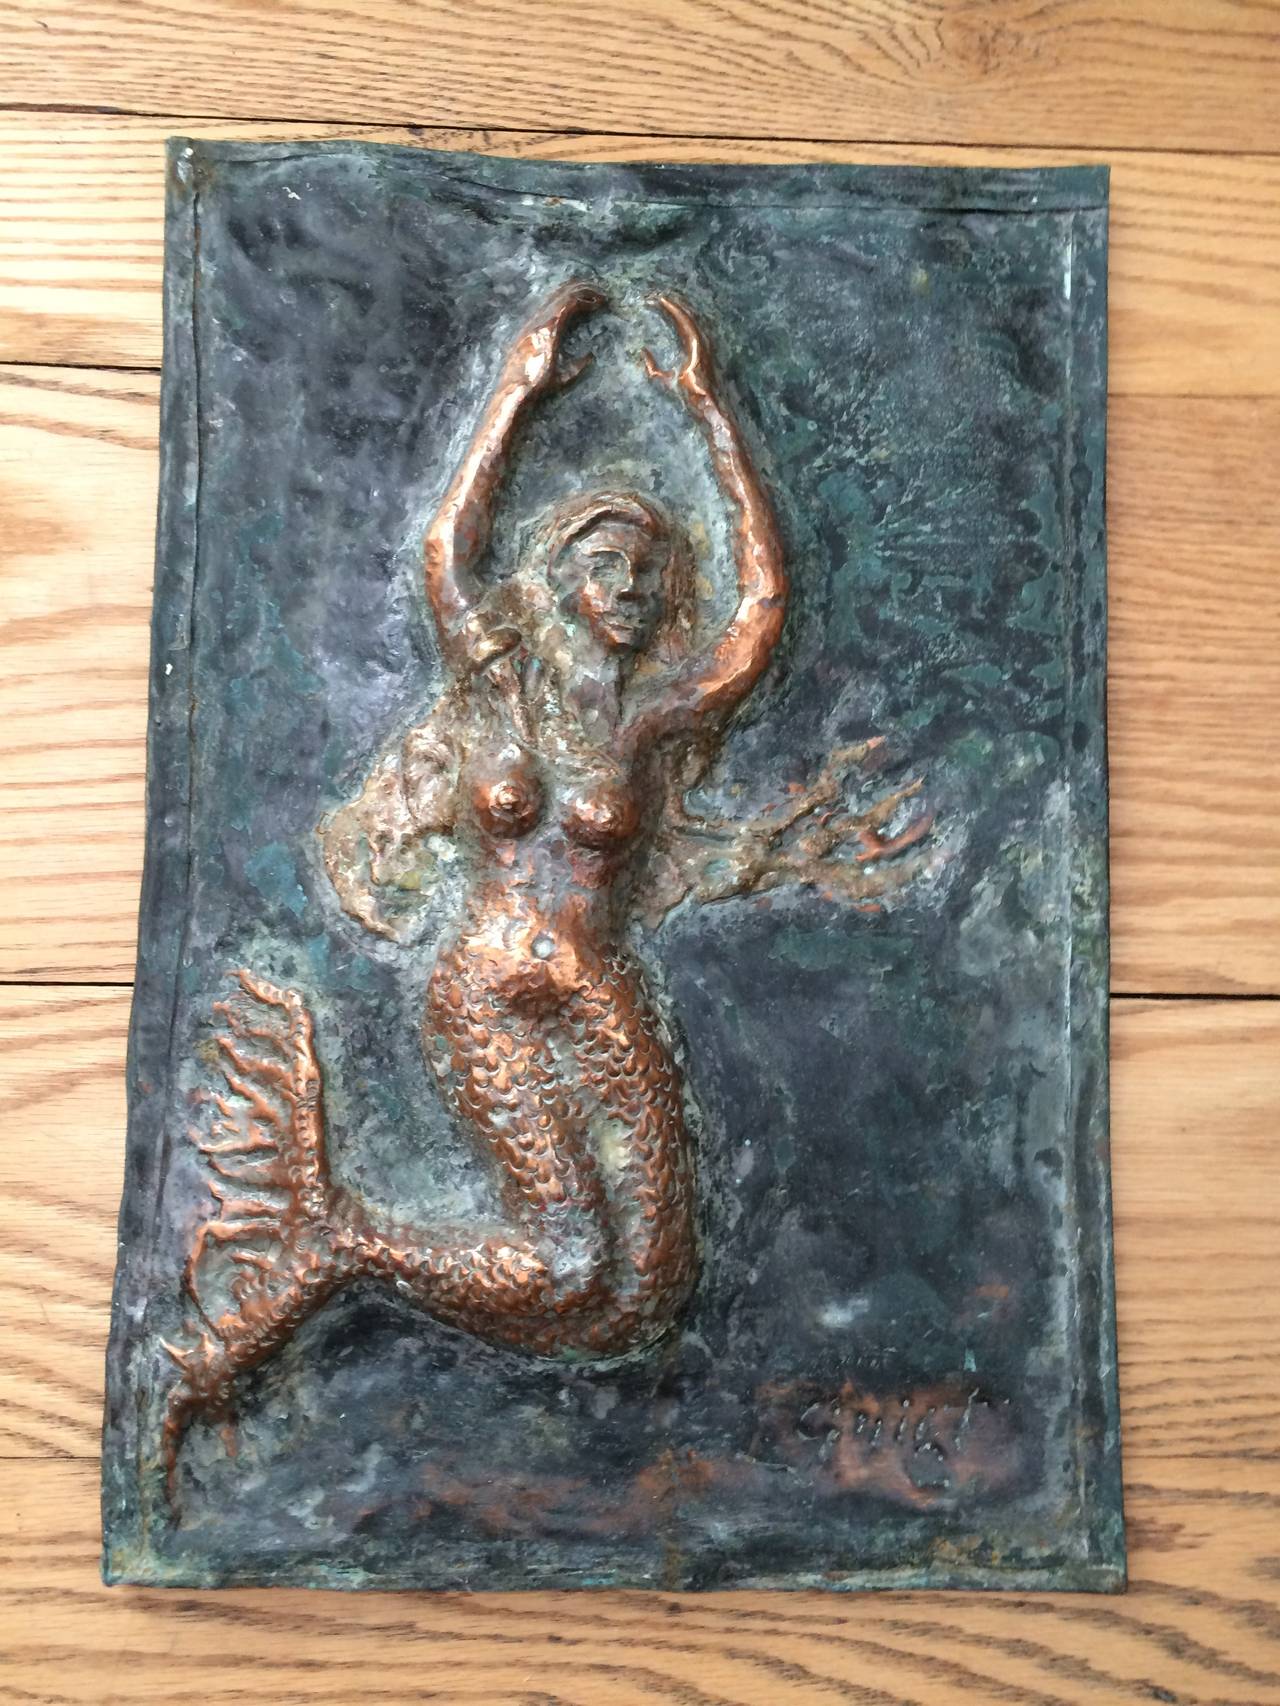 Signed copper plaque of a mermaid. Lovely hand molded copper and bronze relief work of a Mermaid with long hair floating under water. Signed lower right. 